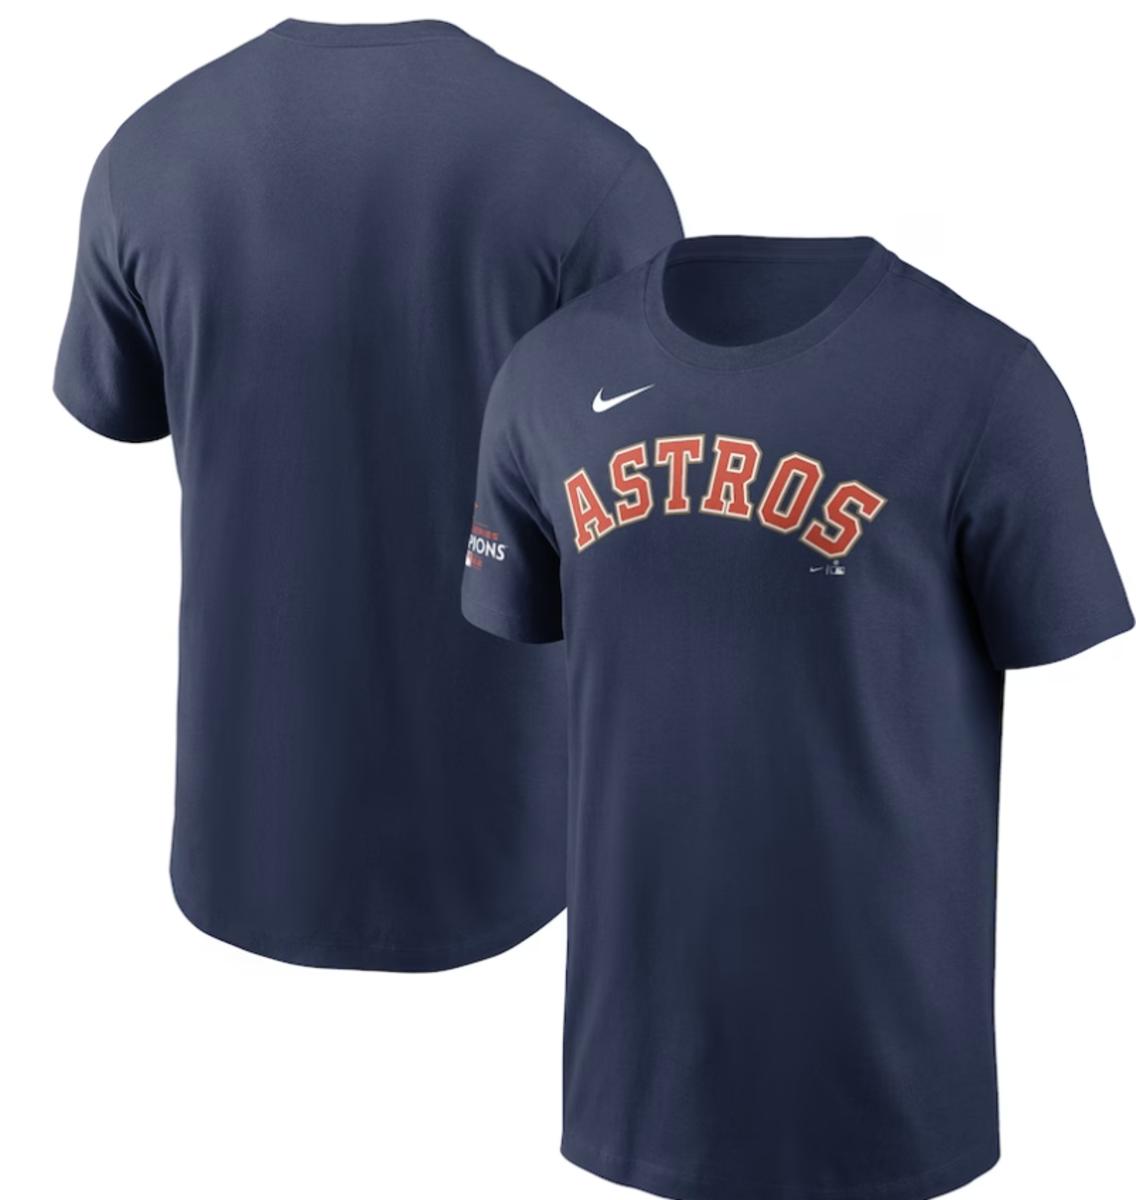 Houston Astros Gold Collection, how to buy your Gold Rush Astros gear